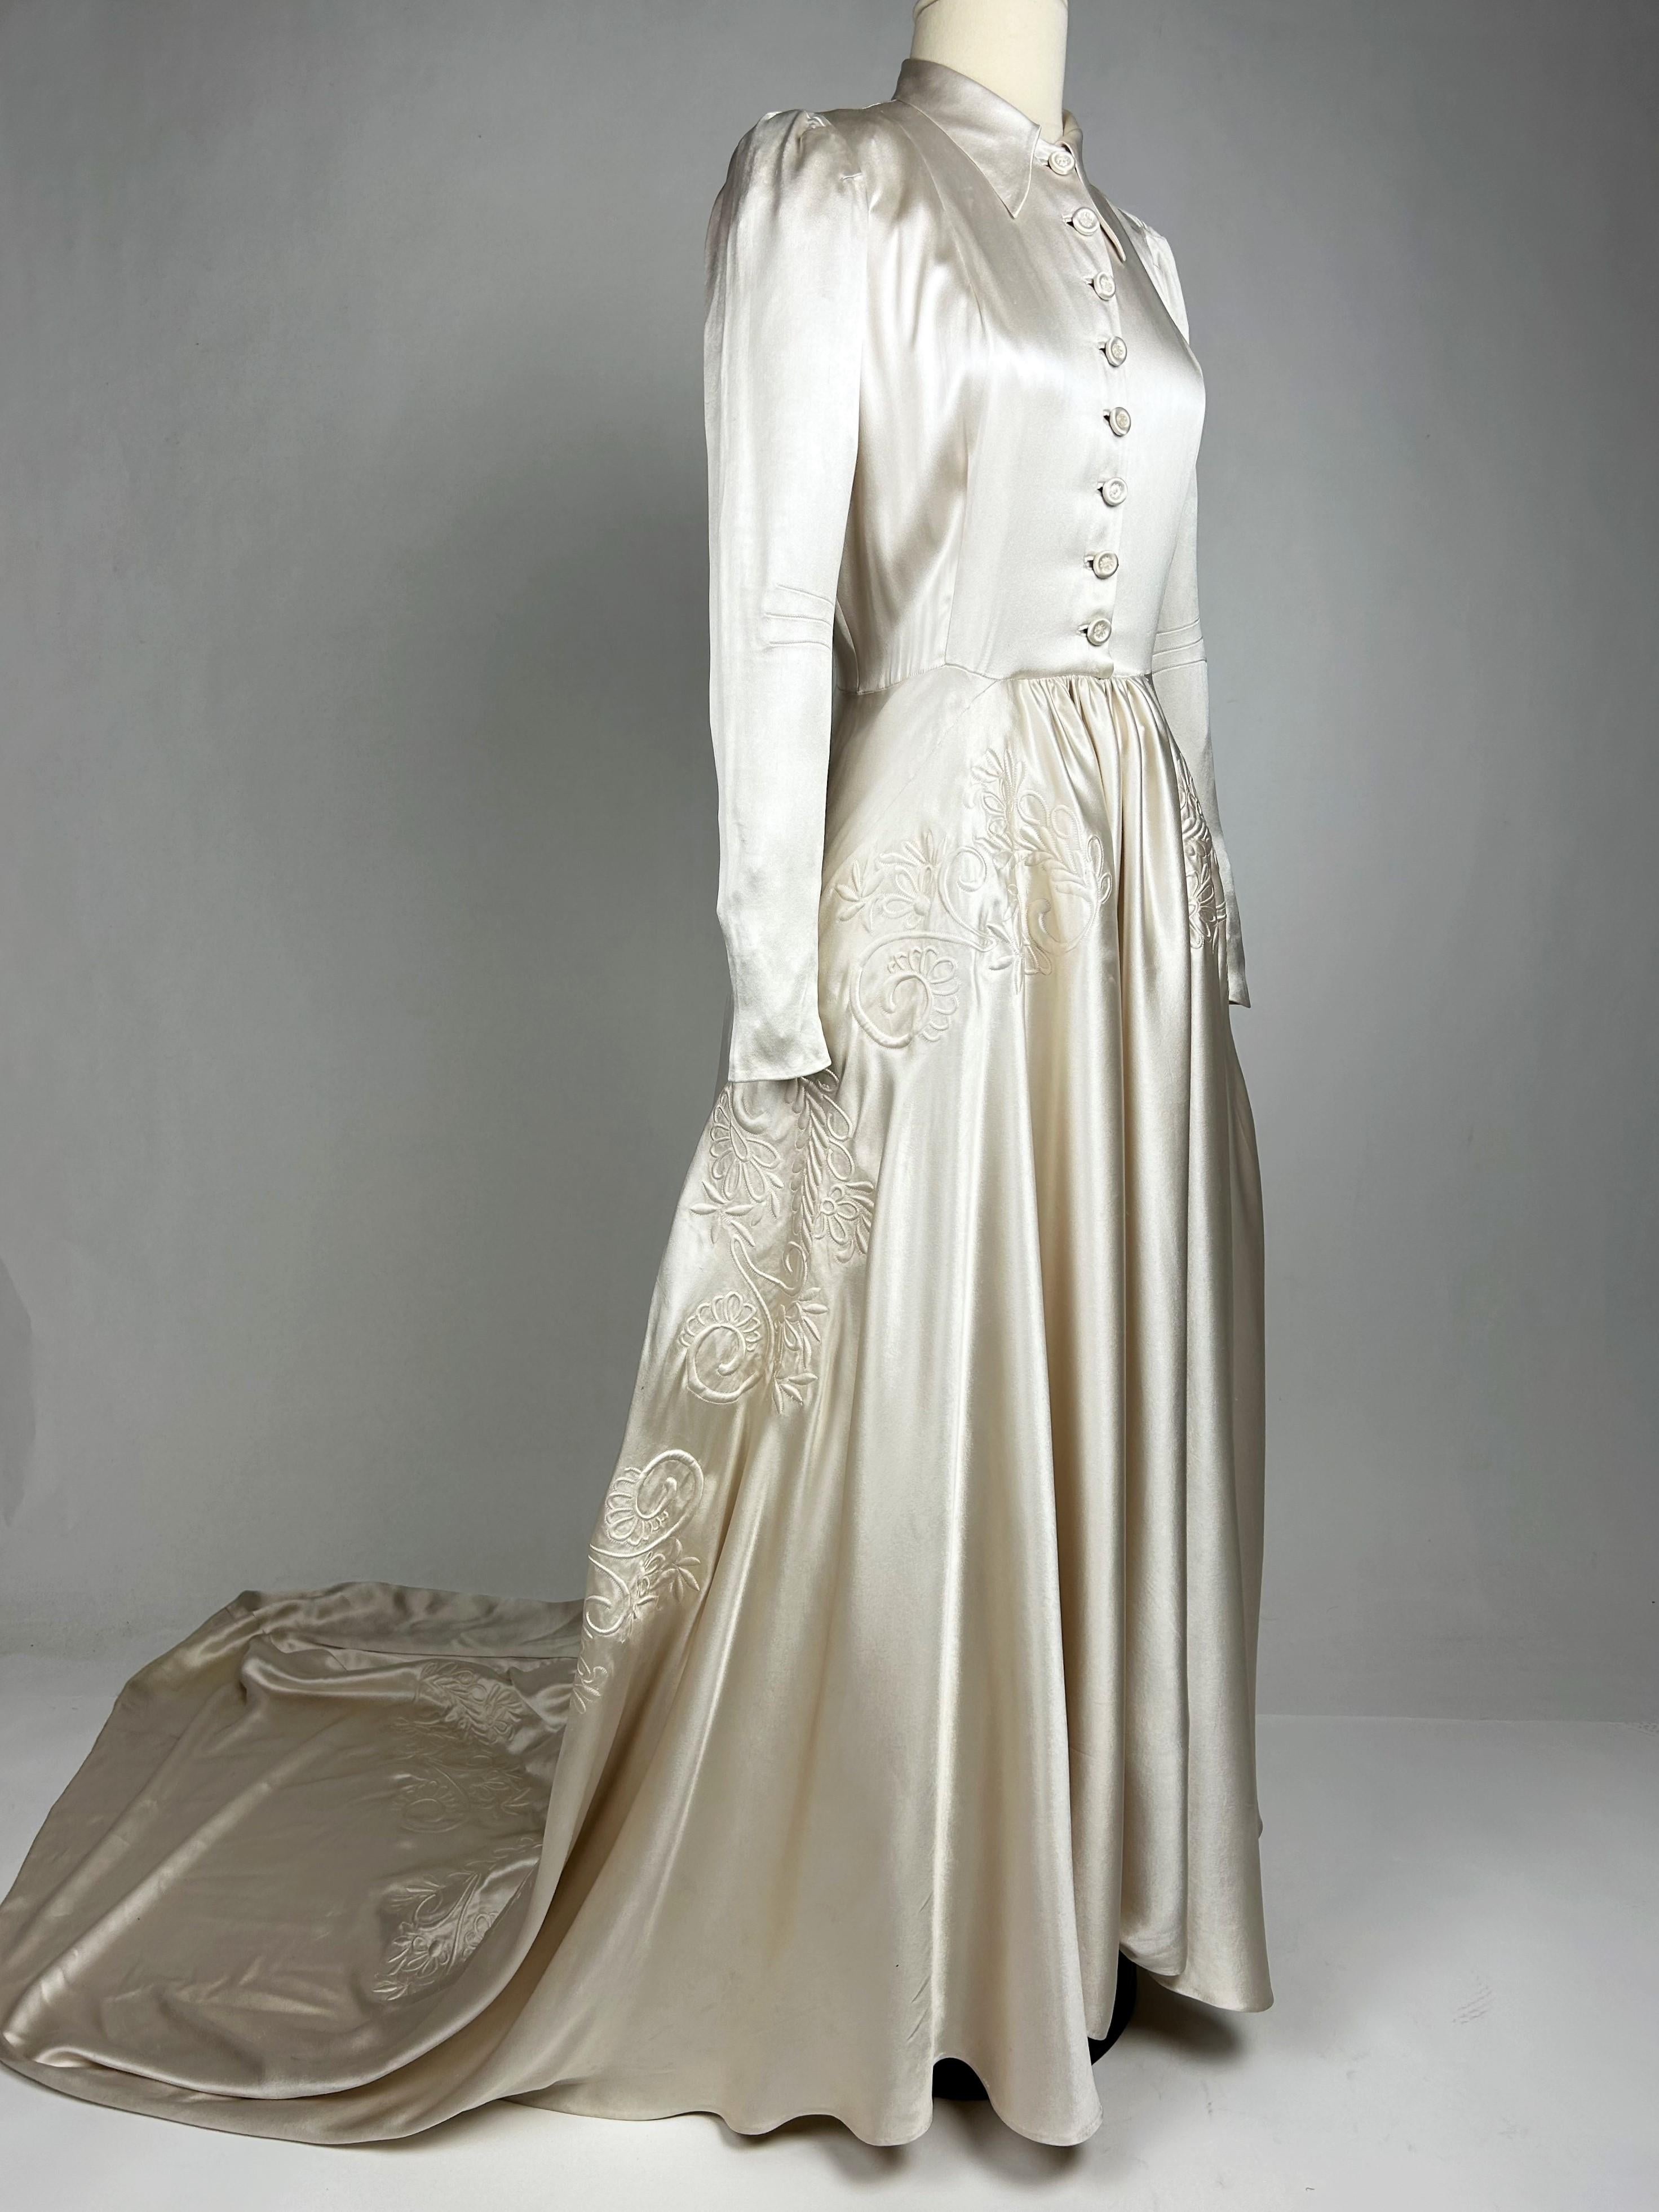 A Champagne Embroidered Satin Wedding Dress with train - France Circa 1940 For Sale 6